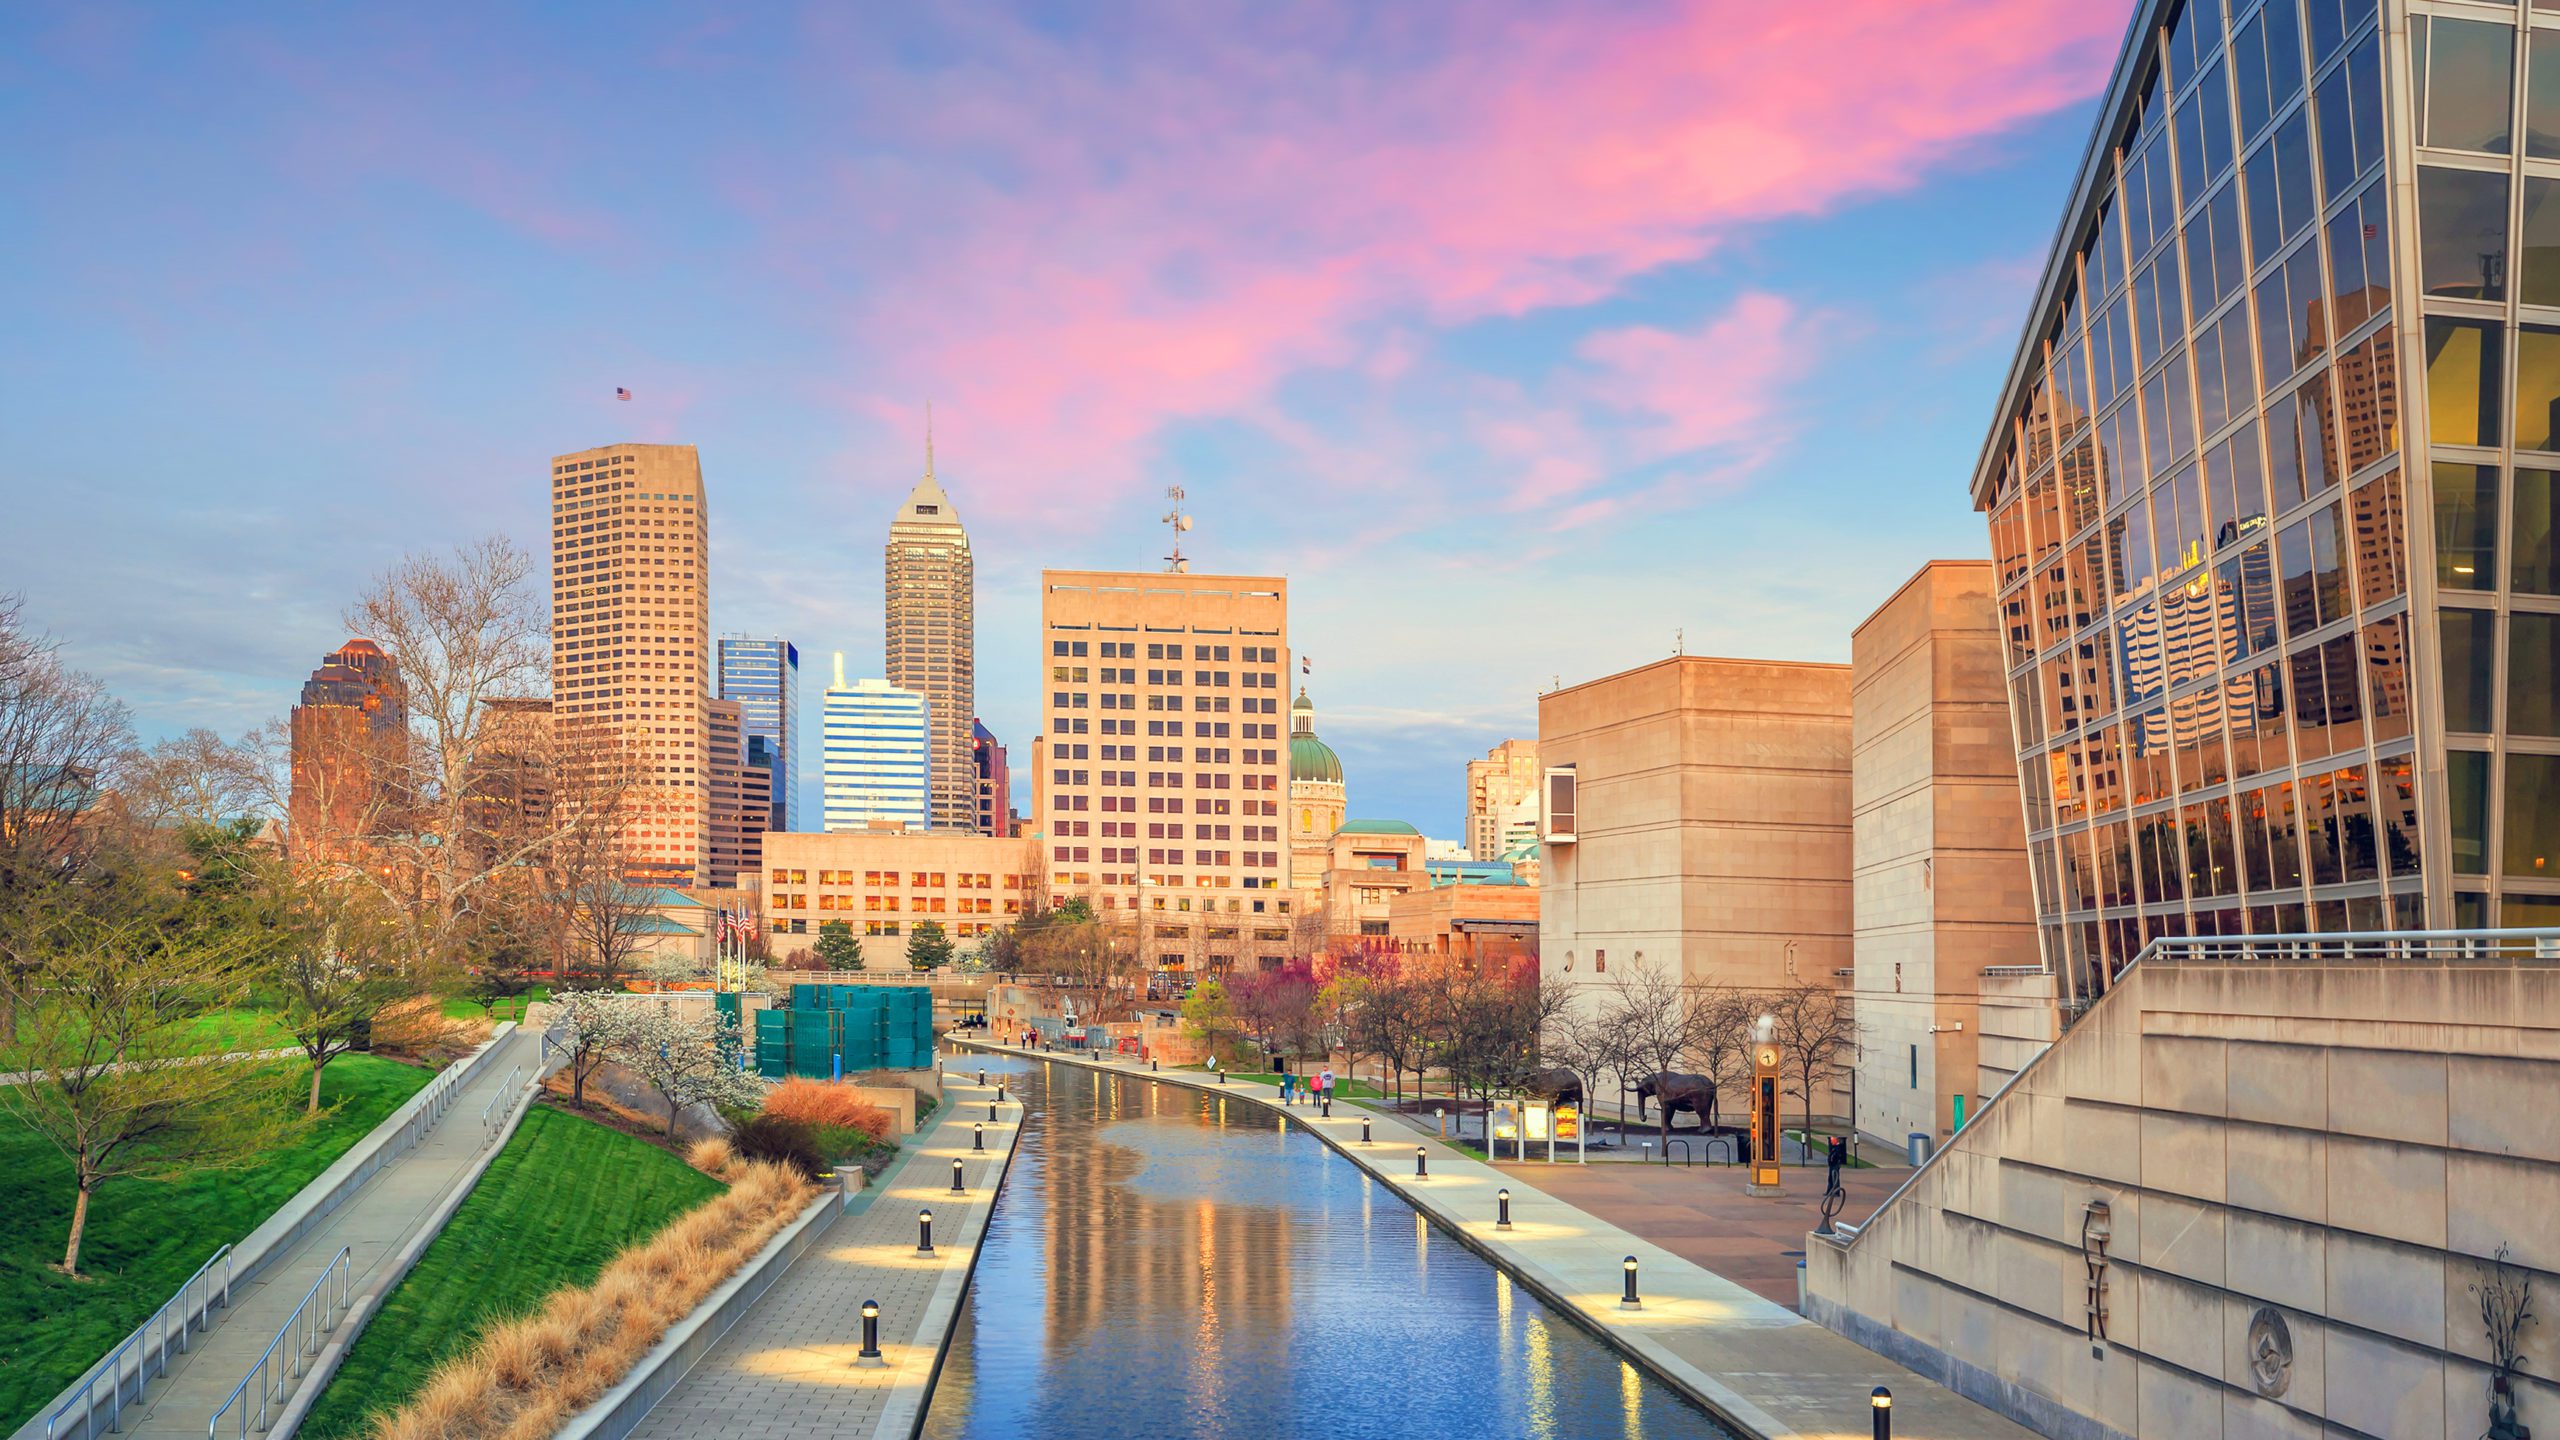 22 Things to do in Indianapolis this Spring Break - Indy's Child